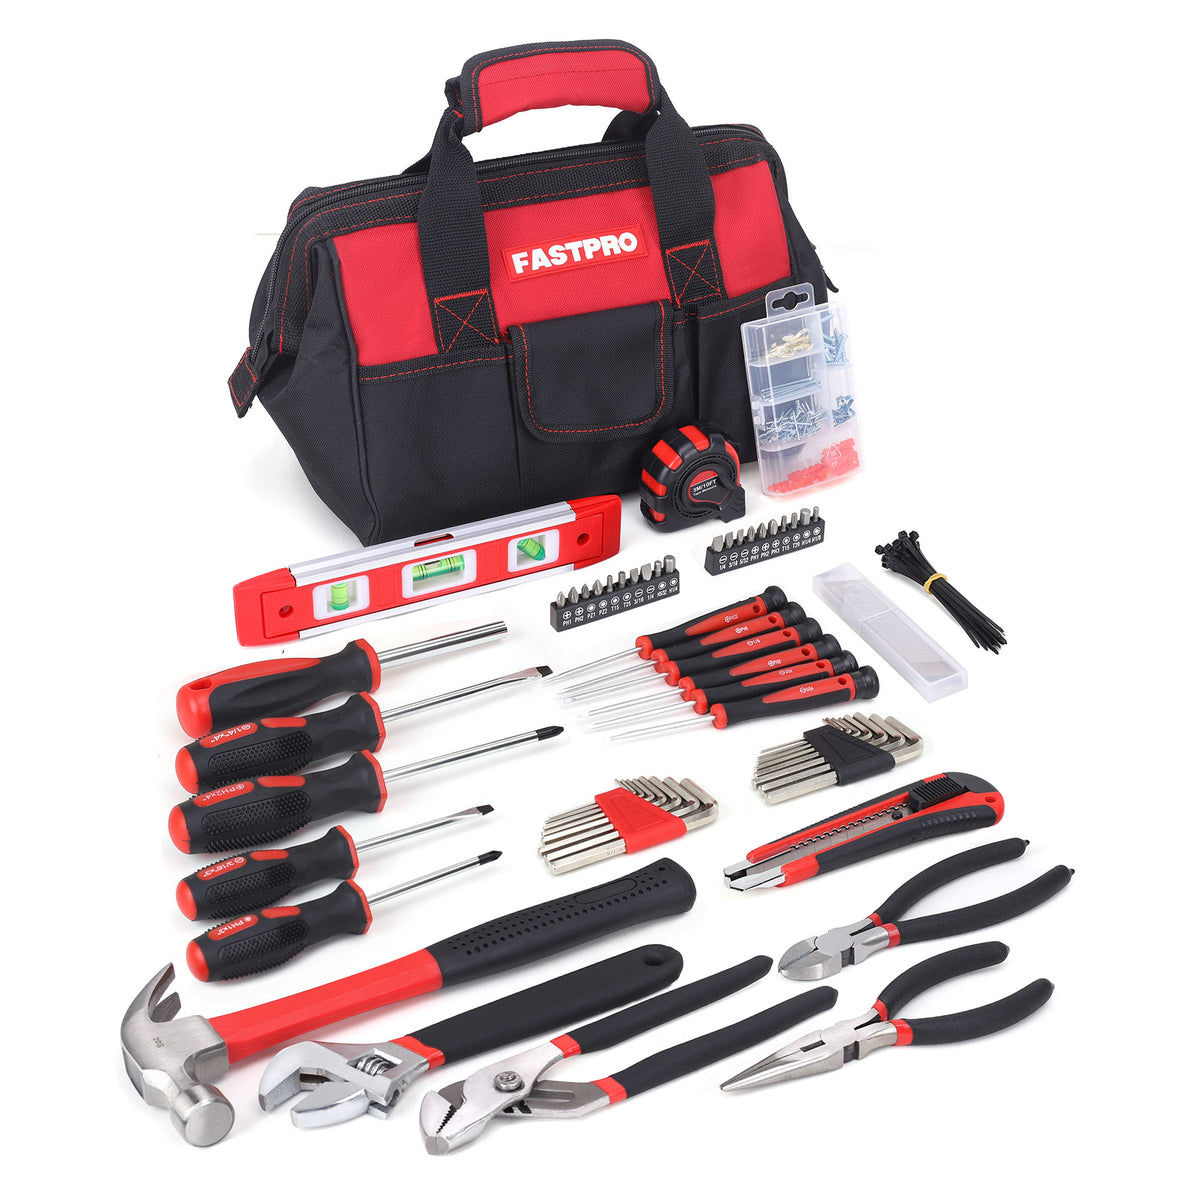 FASTPRO 215-Piece Home Repairing Tool Set with 12-Inch Wide